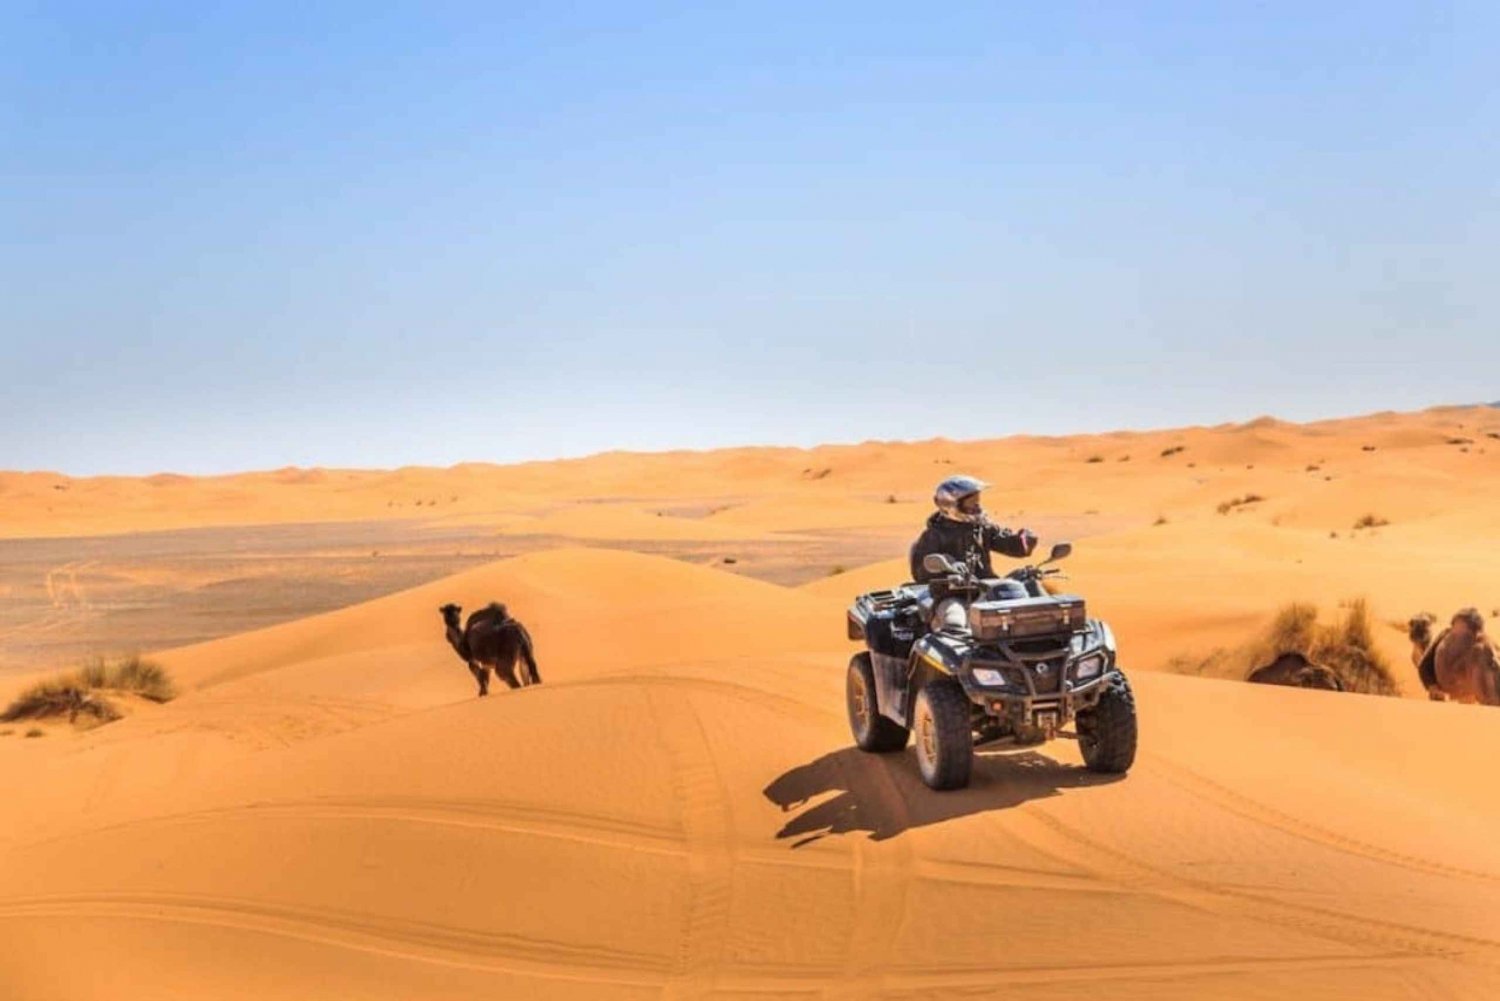 From Marrakech: Agafay Desert Dinner with Quad or Camel Ride